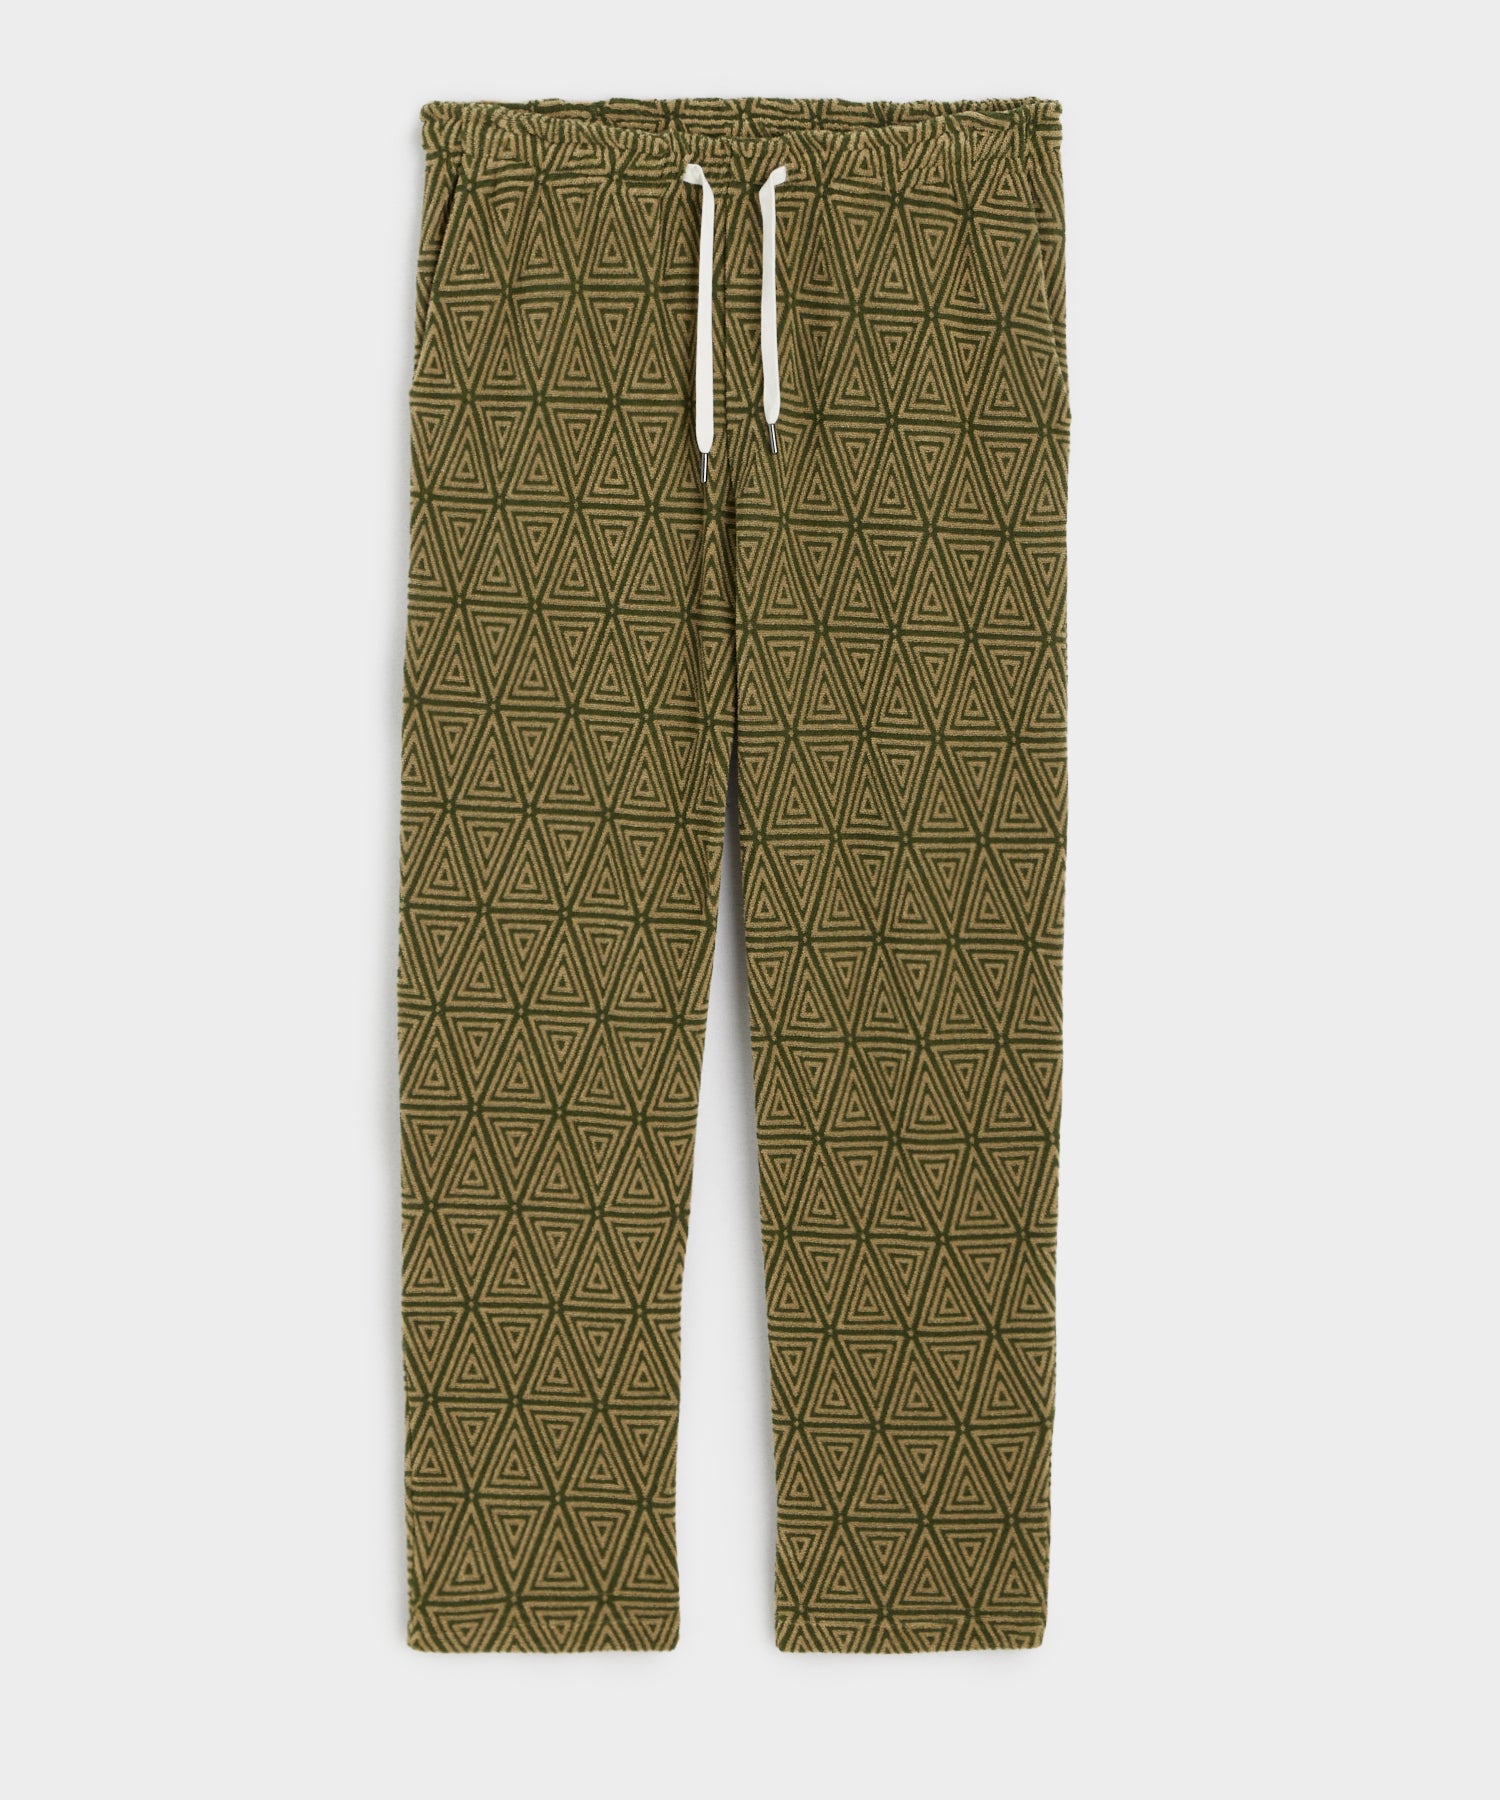 Terry Jacquard Beach Pant in Green Leaf